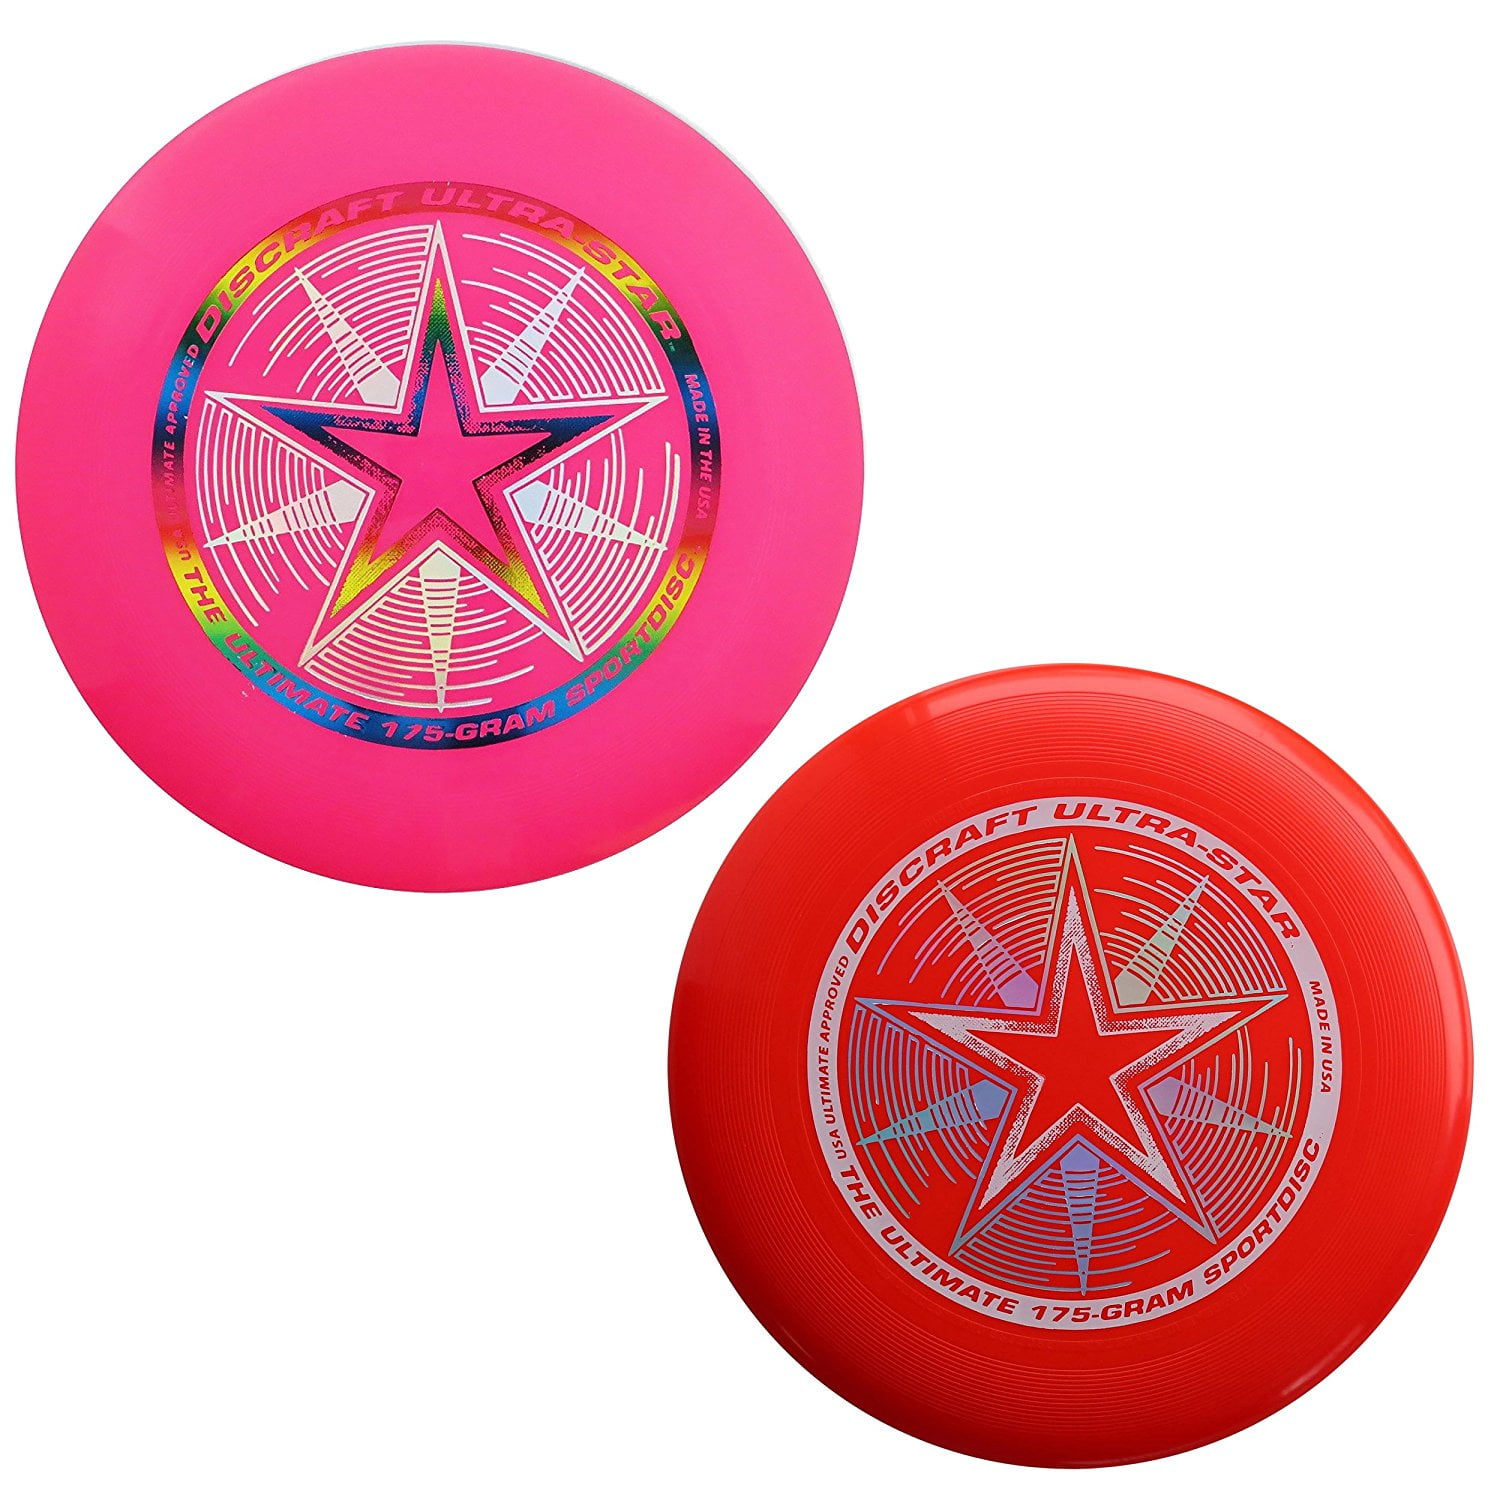 PINK/RED NEW Discraft ULTRA-STAR 175g Ultimate Frisbee Disc 2 Pack 